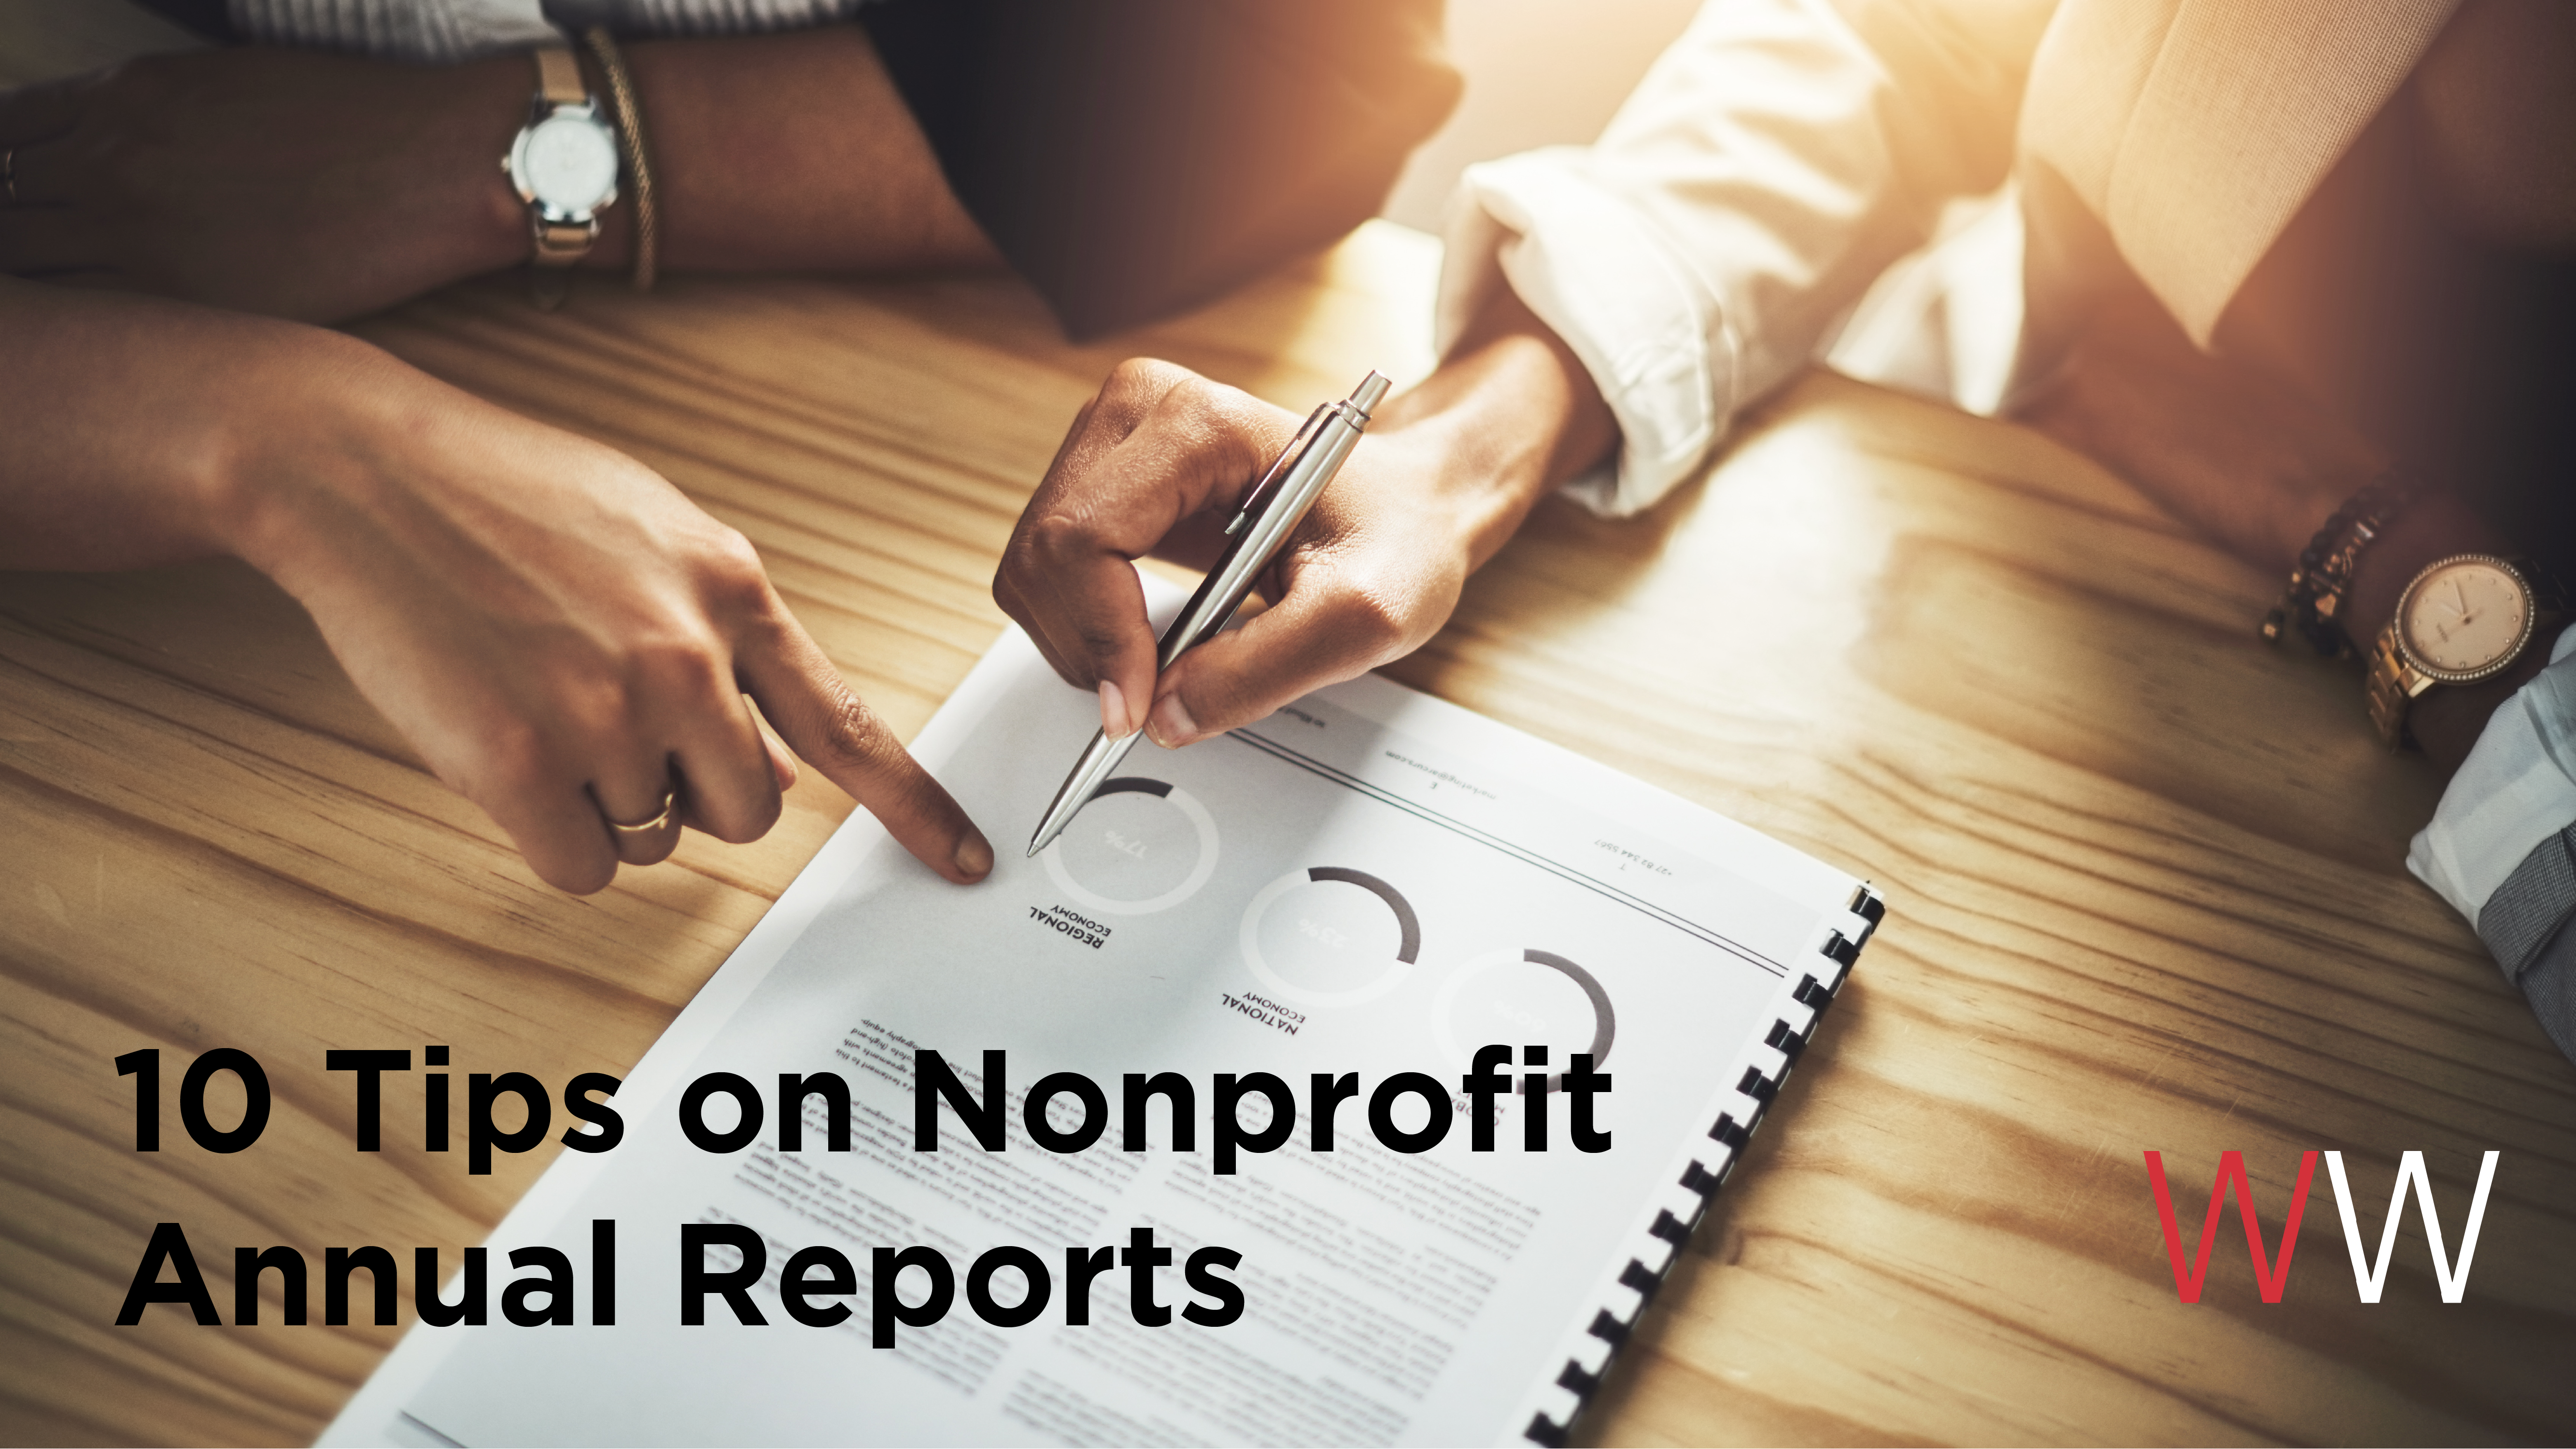 10 Tips on Nonprofit Annual Reports